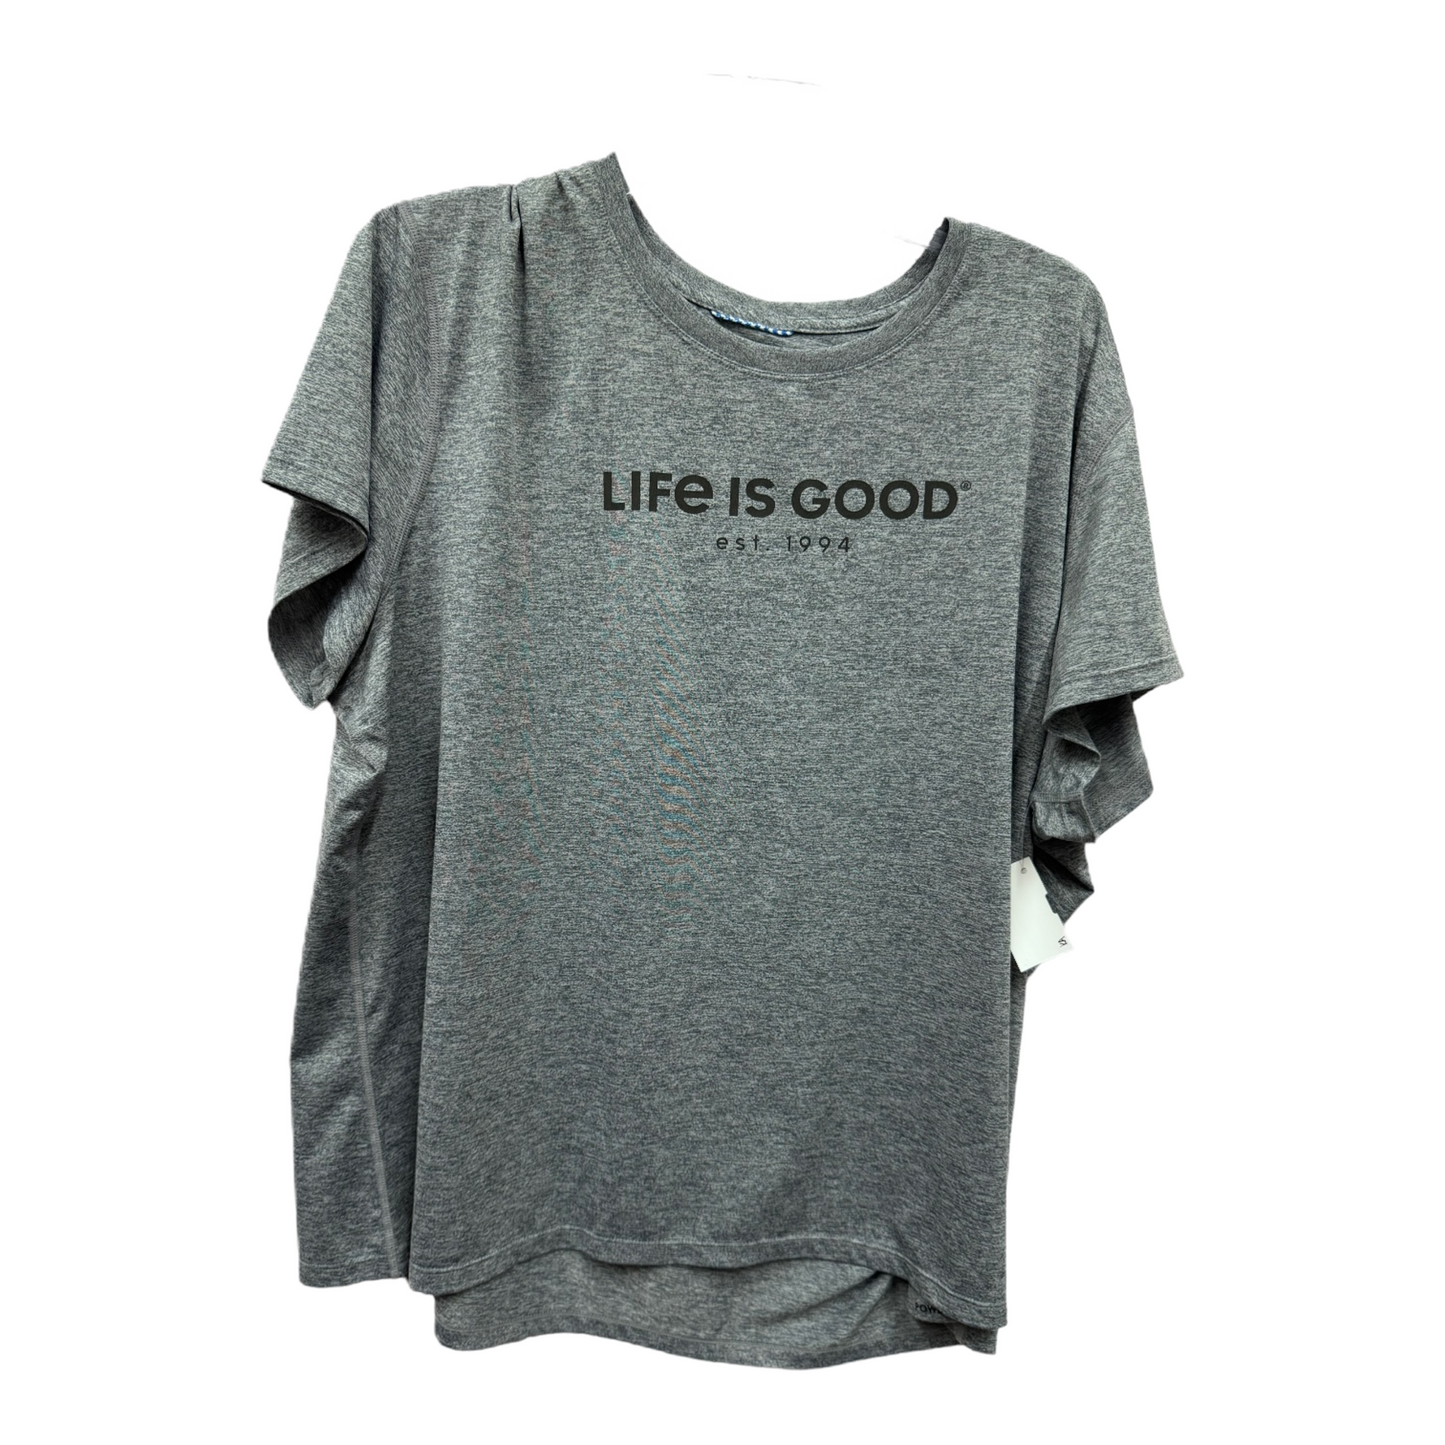 Grey Athletic Top Short Sleeve By Life Is Good, Size: 2x